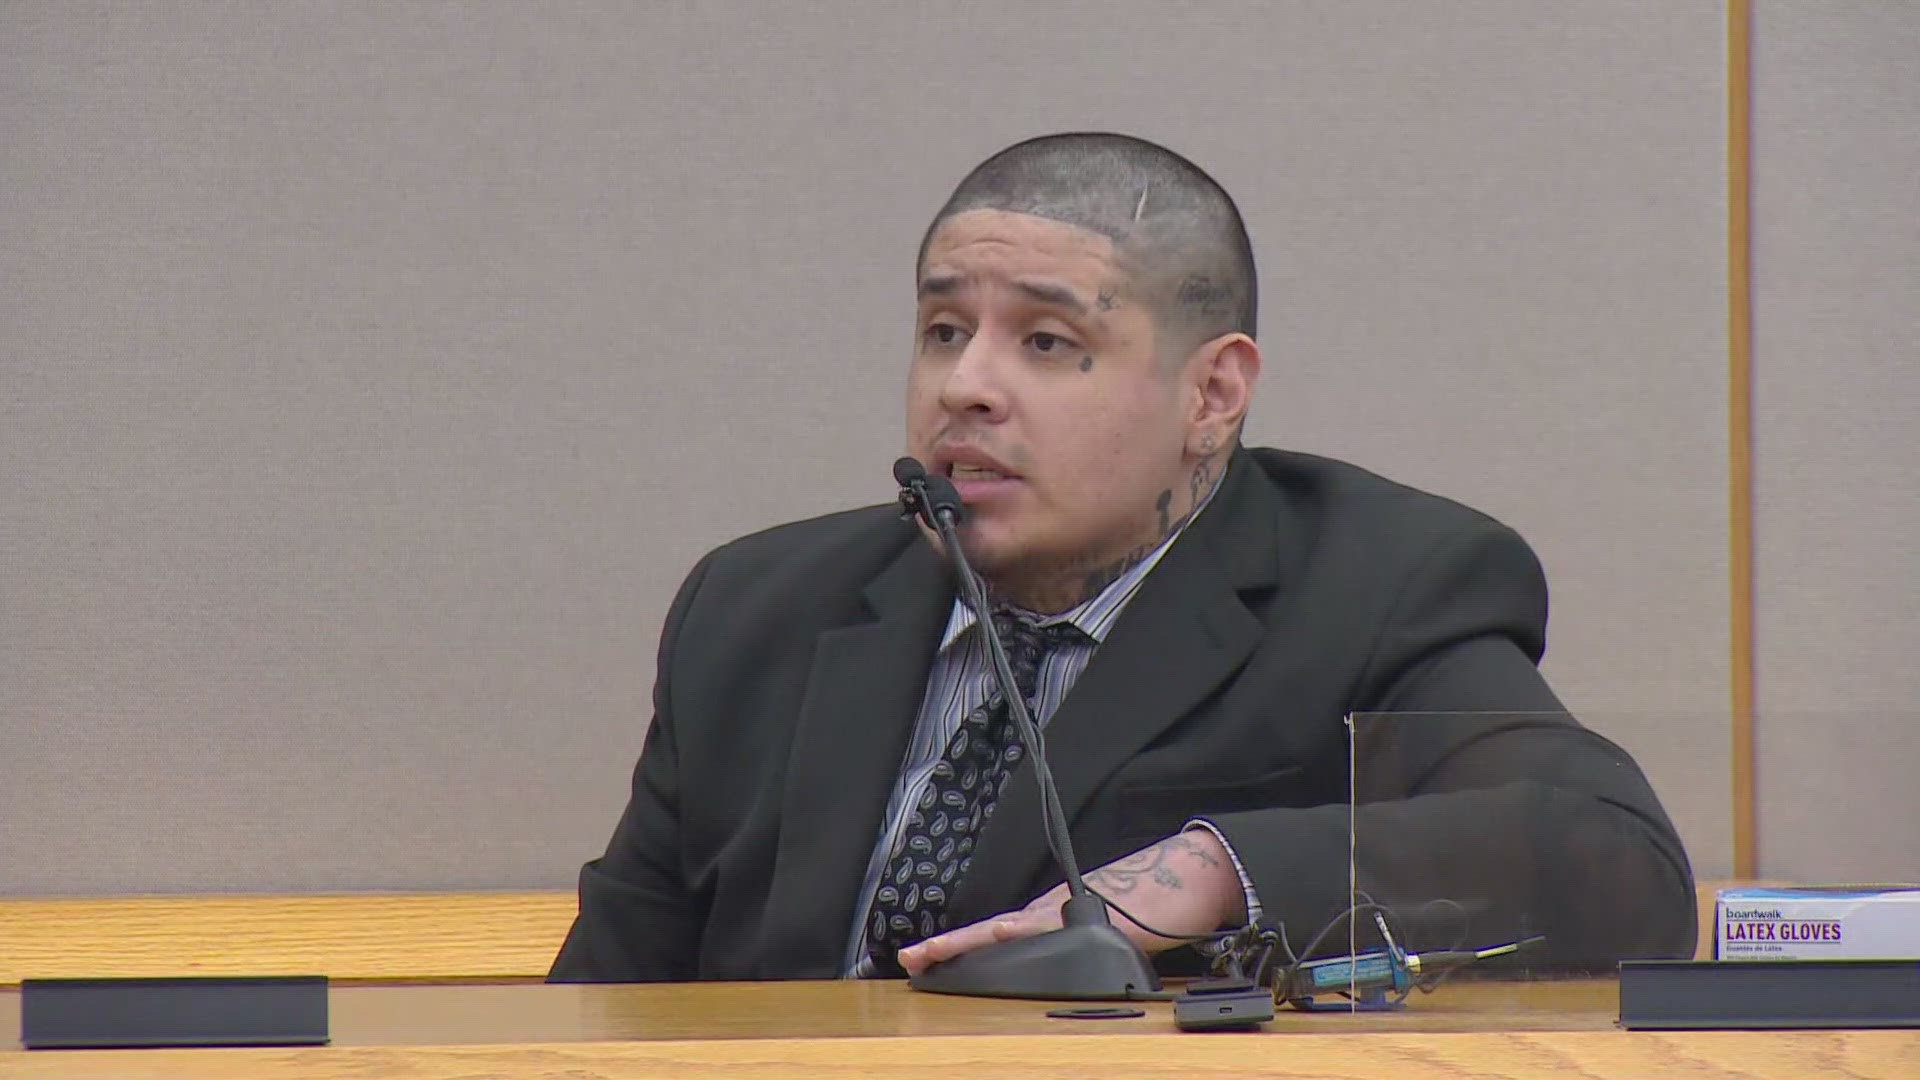 Nestor Hernandez told the jury he carried his girlfriend's bags into the hospital knowing that there was a gun inside.